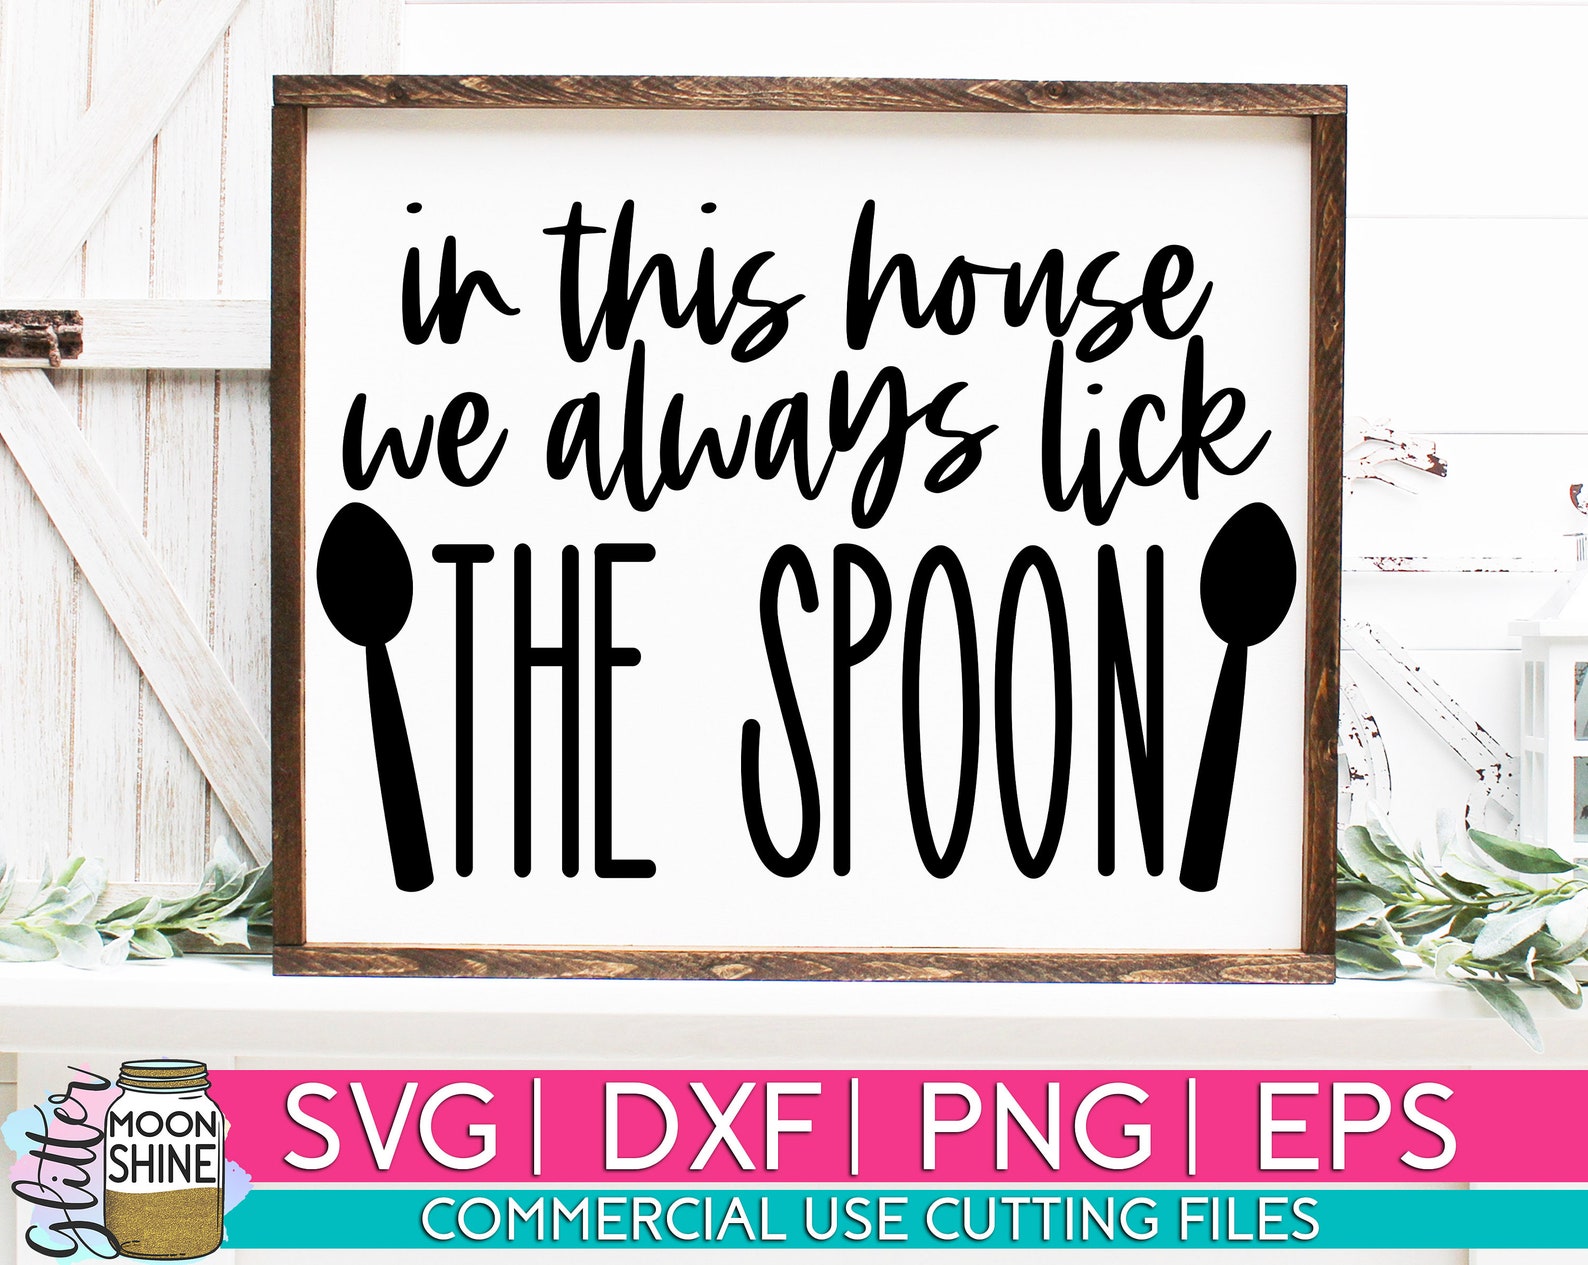 In This House We Lick the Spoon Svg Eps Dxf Png Files for - Etsy